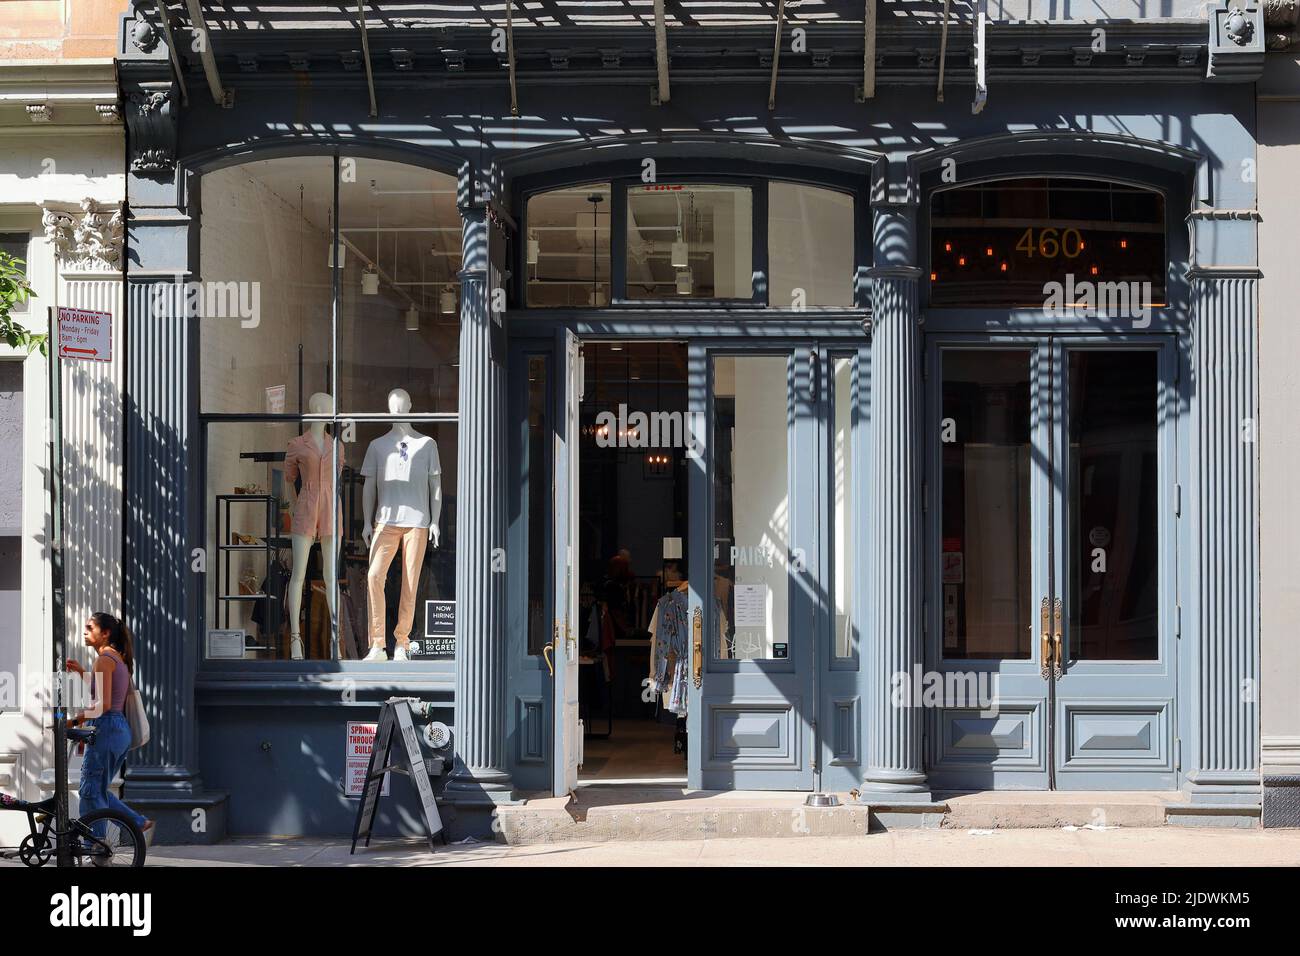 Paige, 460 Broome St, New York, NY. exterior storefront of a clothing store in the SoHo neighborhood in Manhattan. Stock Photo